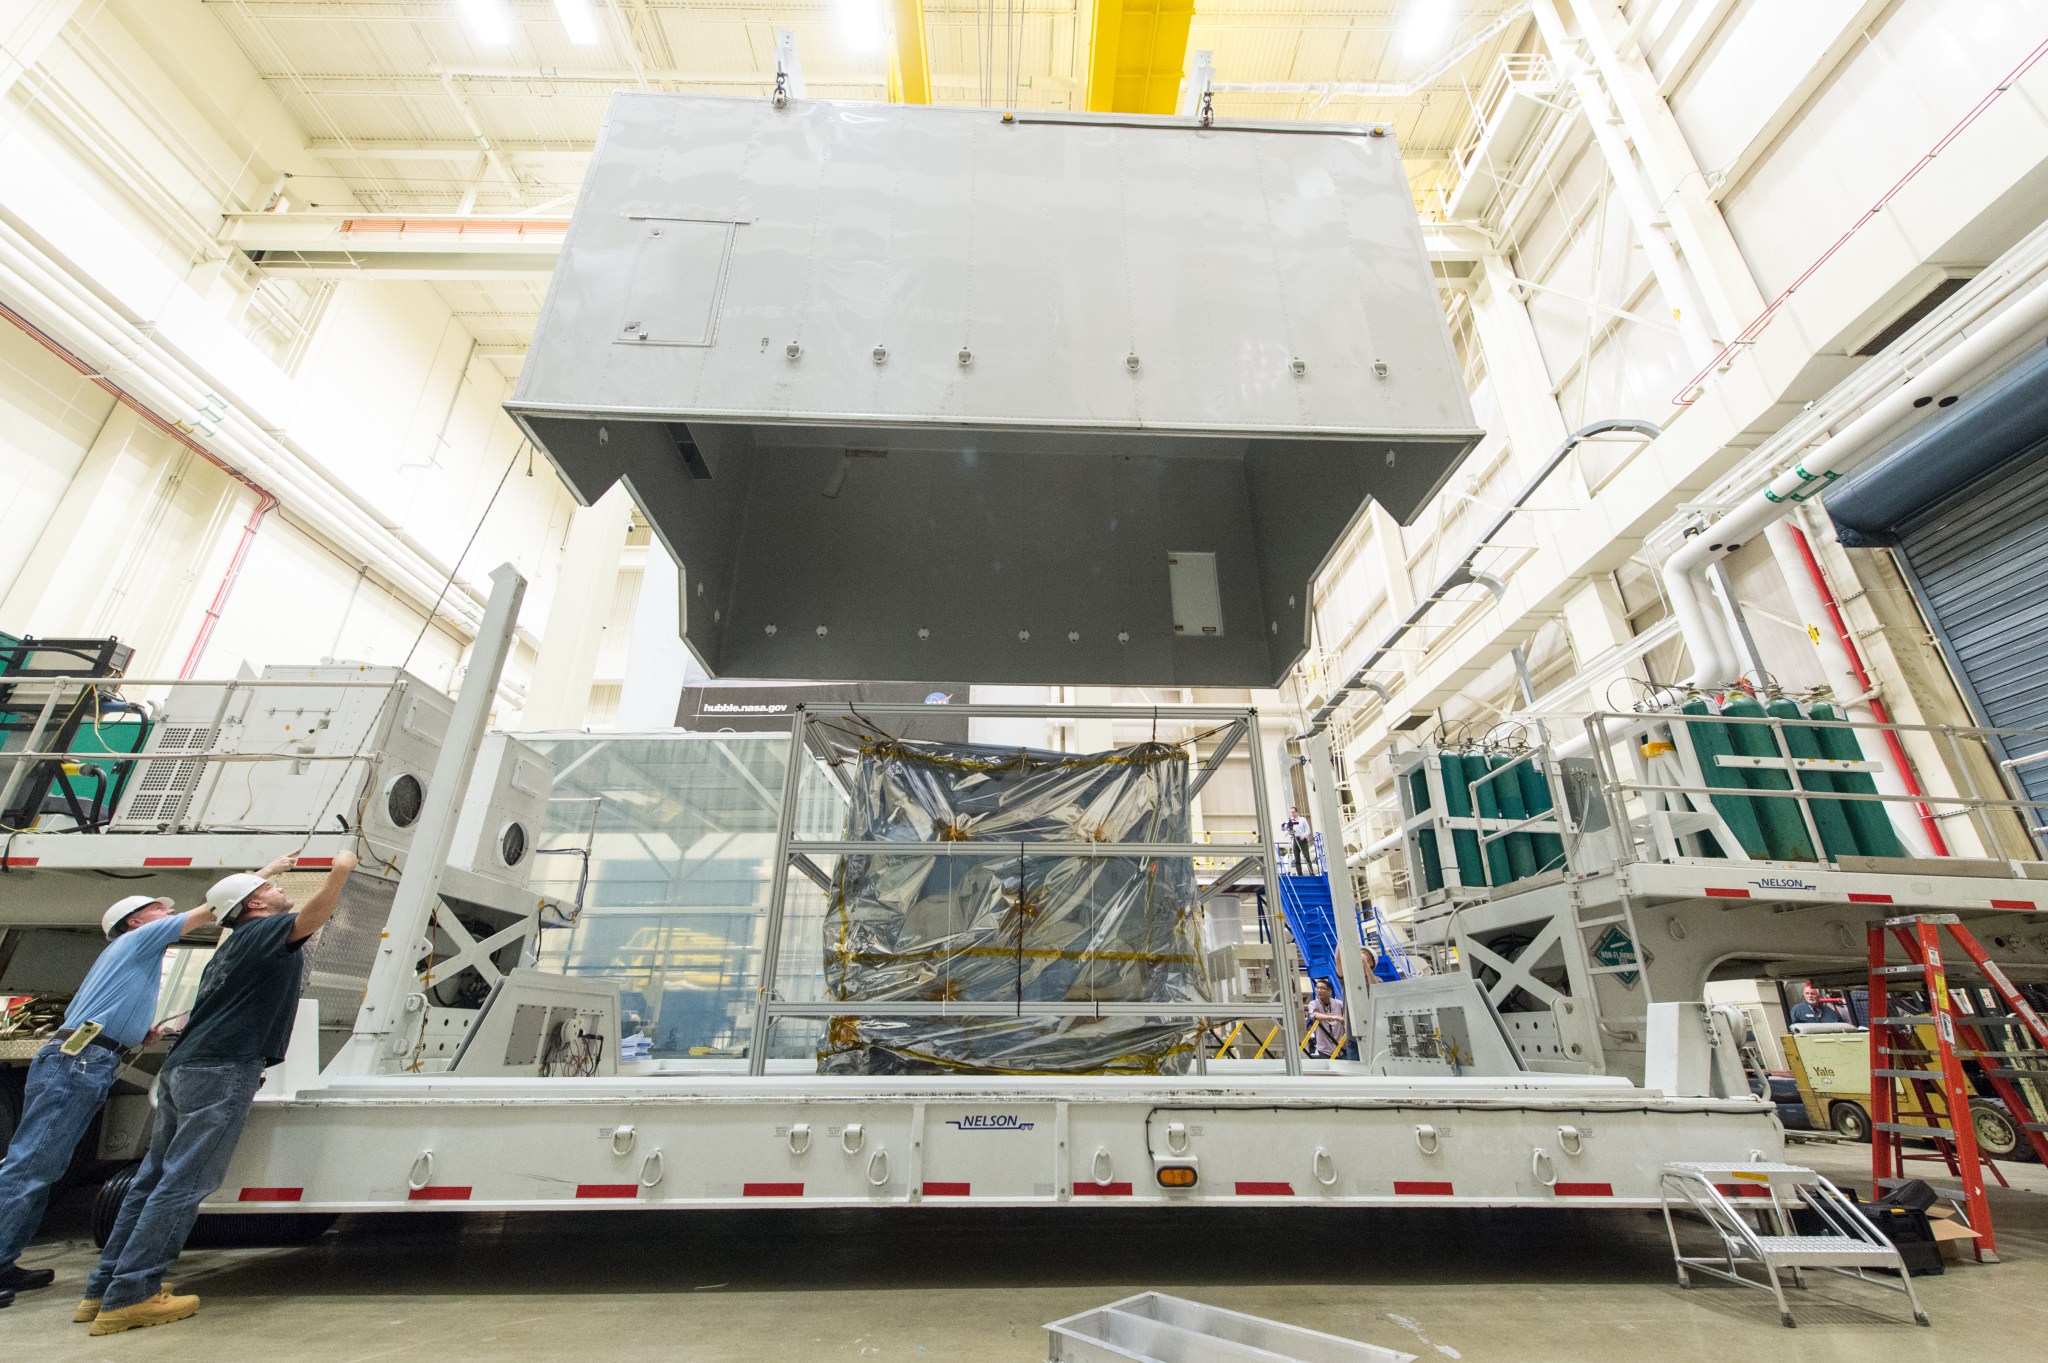 Crews at NASA Goddard lower a cover onto the transporter truck. The spacecraft is encased in silver foil and the lid of the cover is being lowered from the ceiling, like a big box.